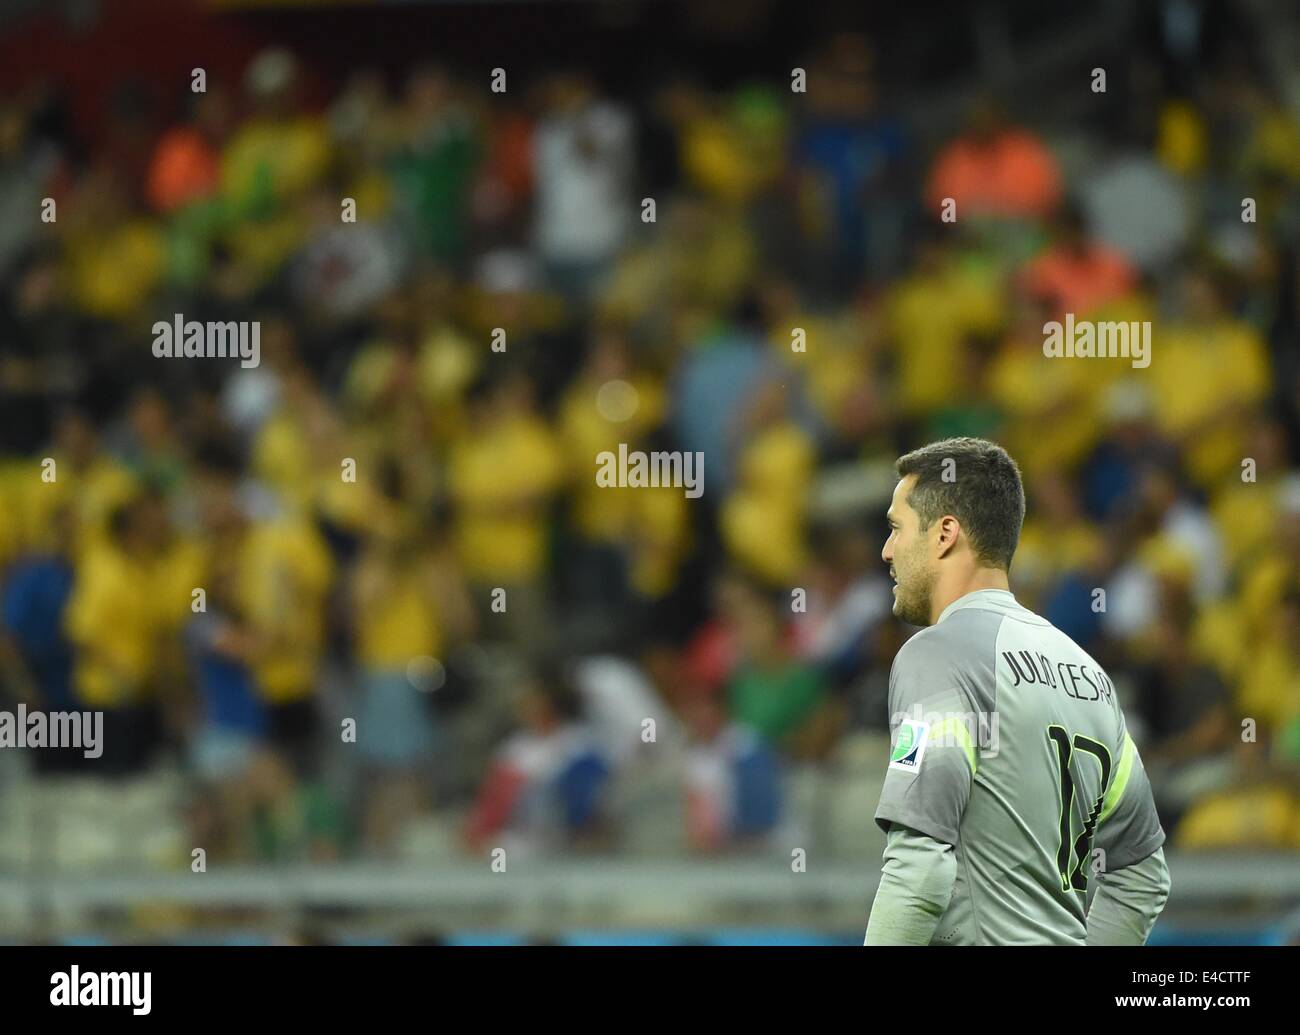 Belo Horizonte, Brazil. 8th July, 2014. Brazil's goalkeeper Julio Cesar looks on during a semifinal match between Brazil and Germany of 2014 FIFA World Cup at the Estadio Mineirao Stadium in Belo Horizonte, Brazil, on July 8, 2014. Germany won 7-1 over Brazil and qualified for the final on Tuesday. Credit:  Liu Dawei/Xinhua/Alamy Live News Stock Photo